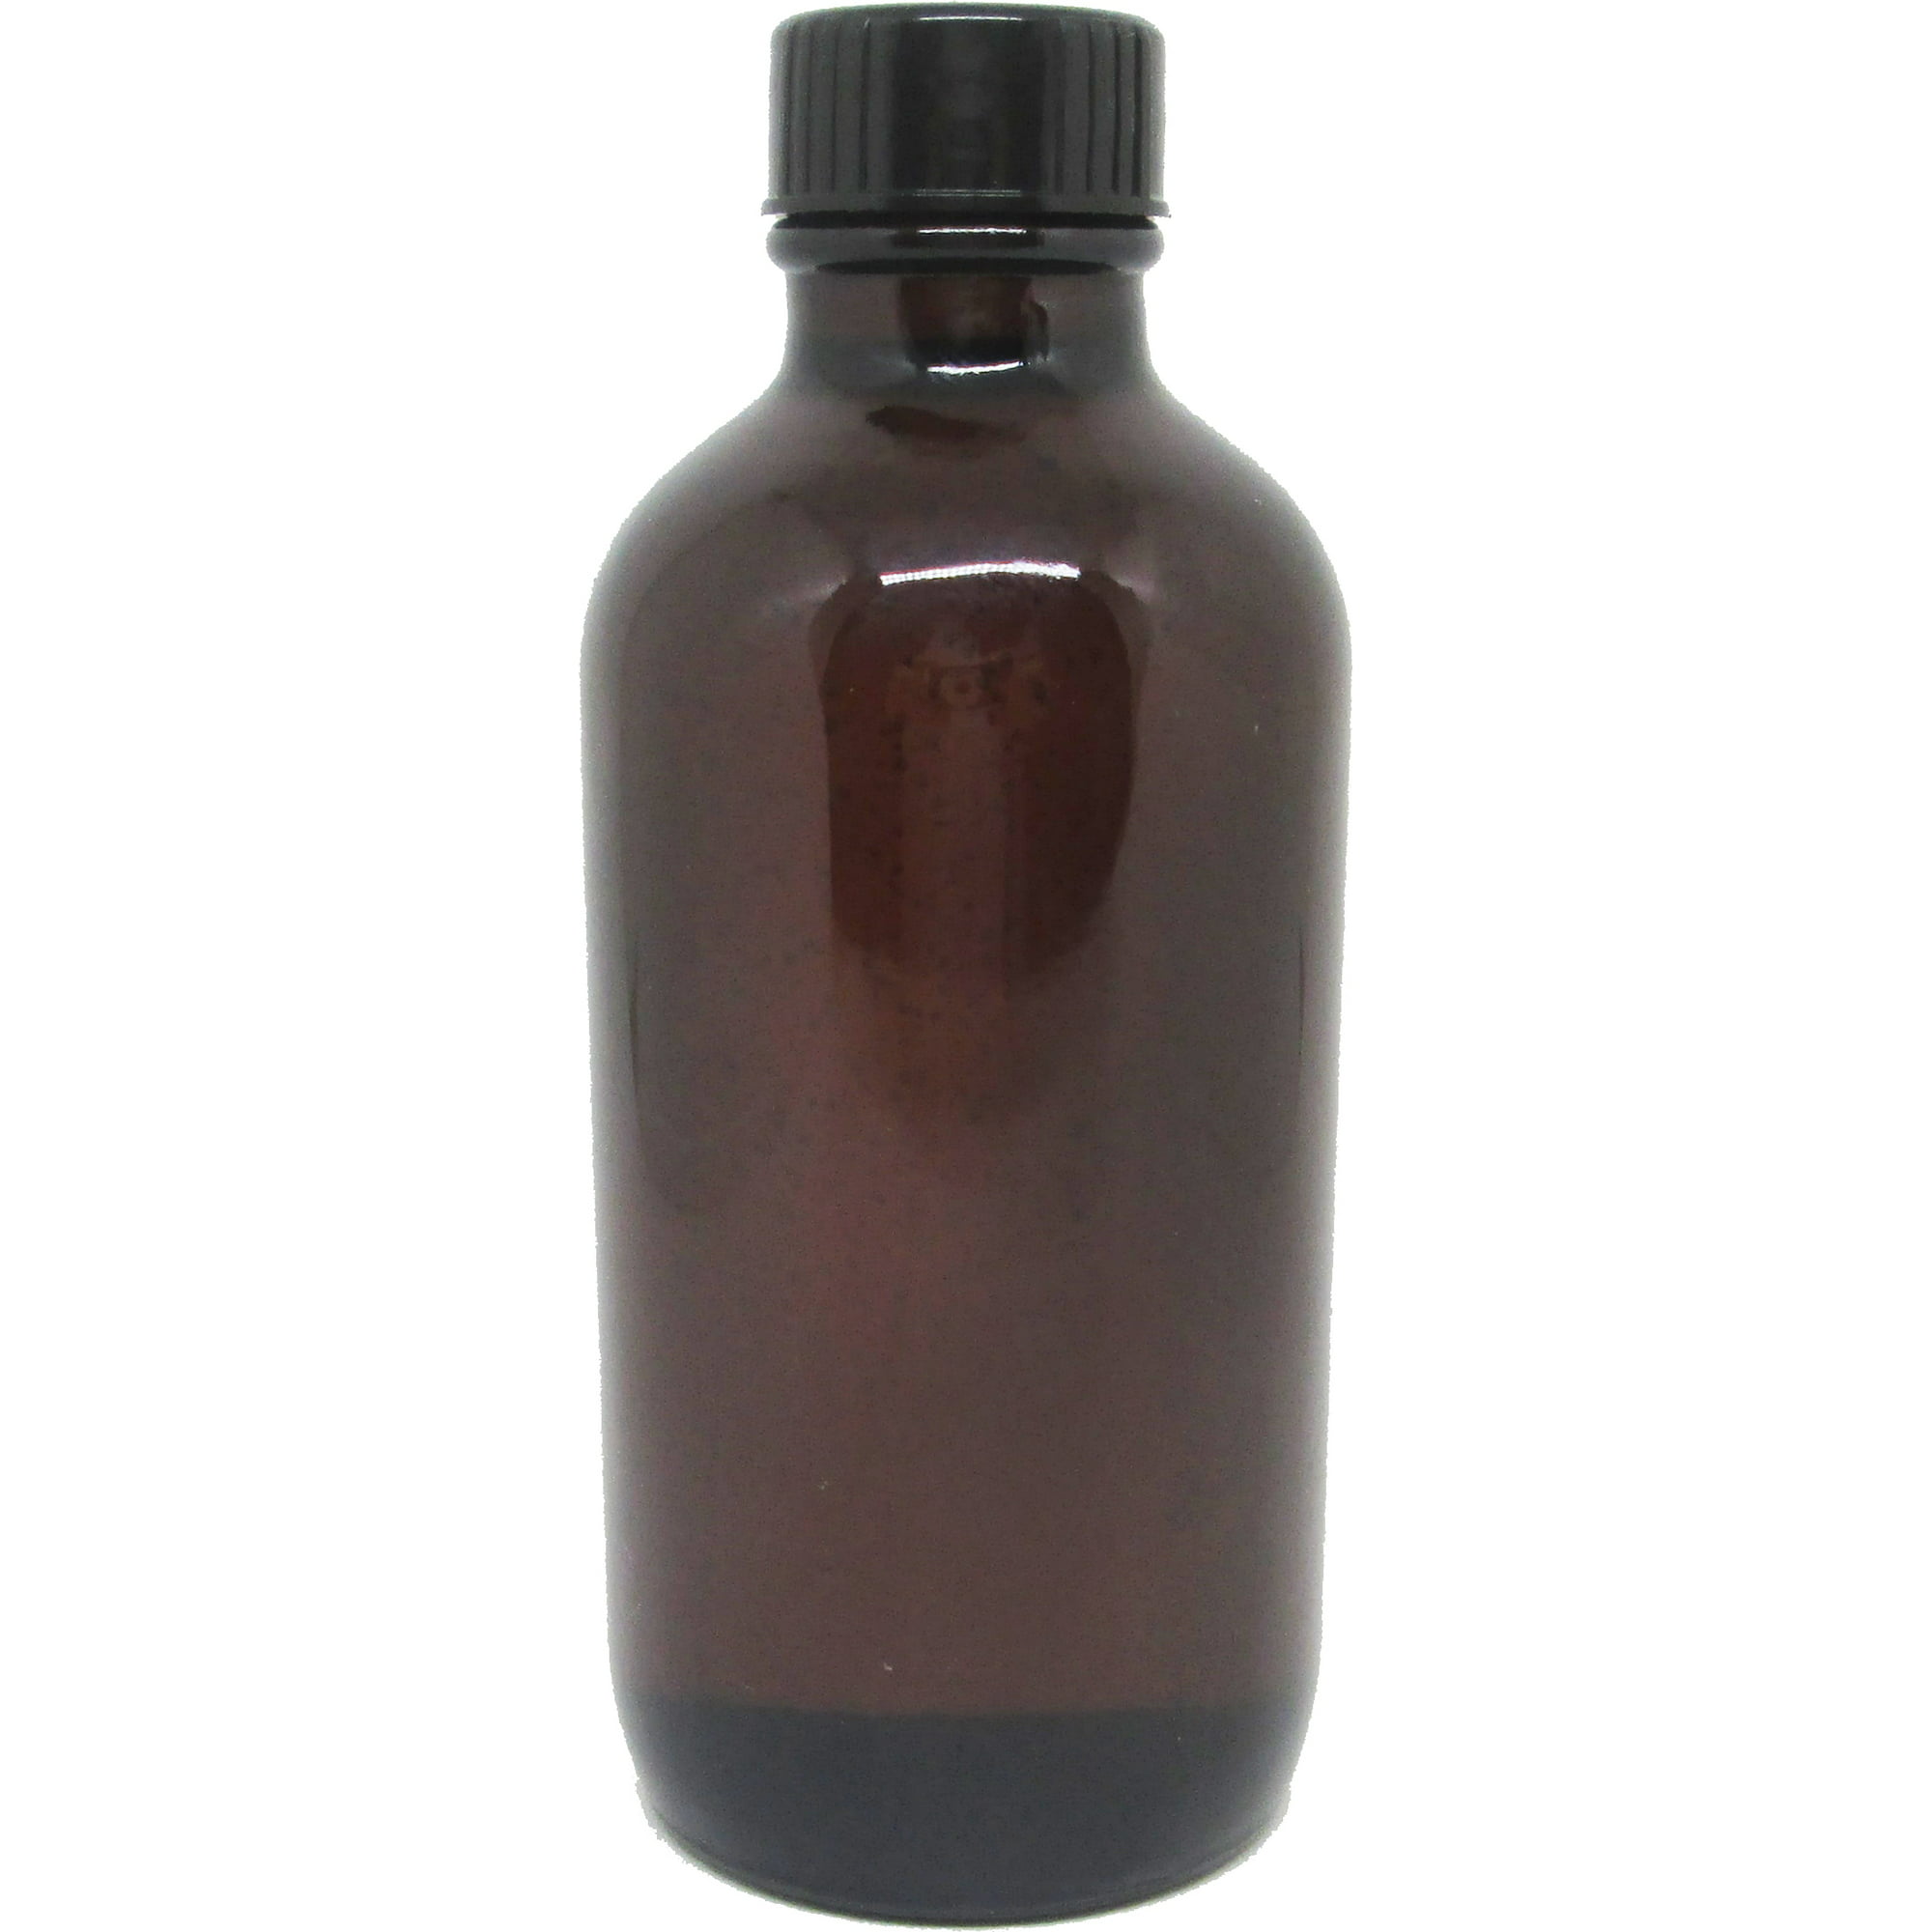 Chanel: No. 5 - Type Scented Body Oil Fragrance [Regular Cap - Brown Amber Glass - Brown - 4 oz.]